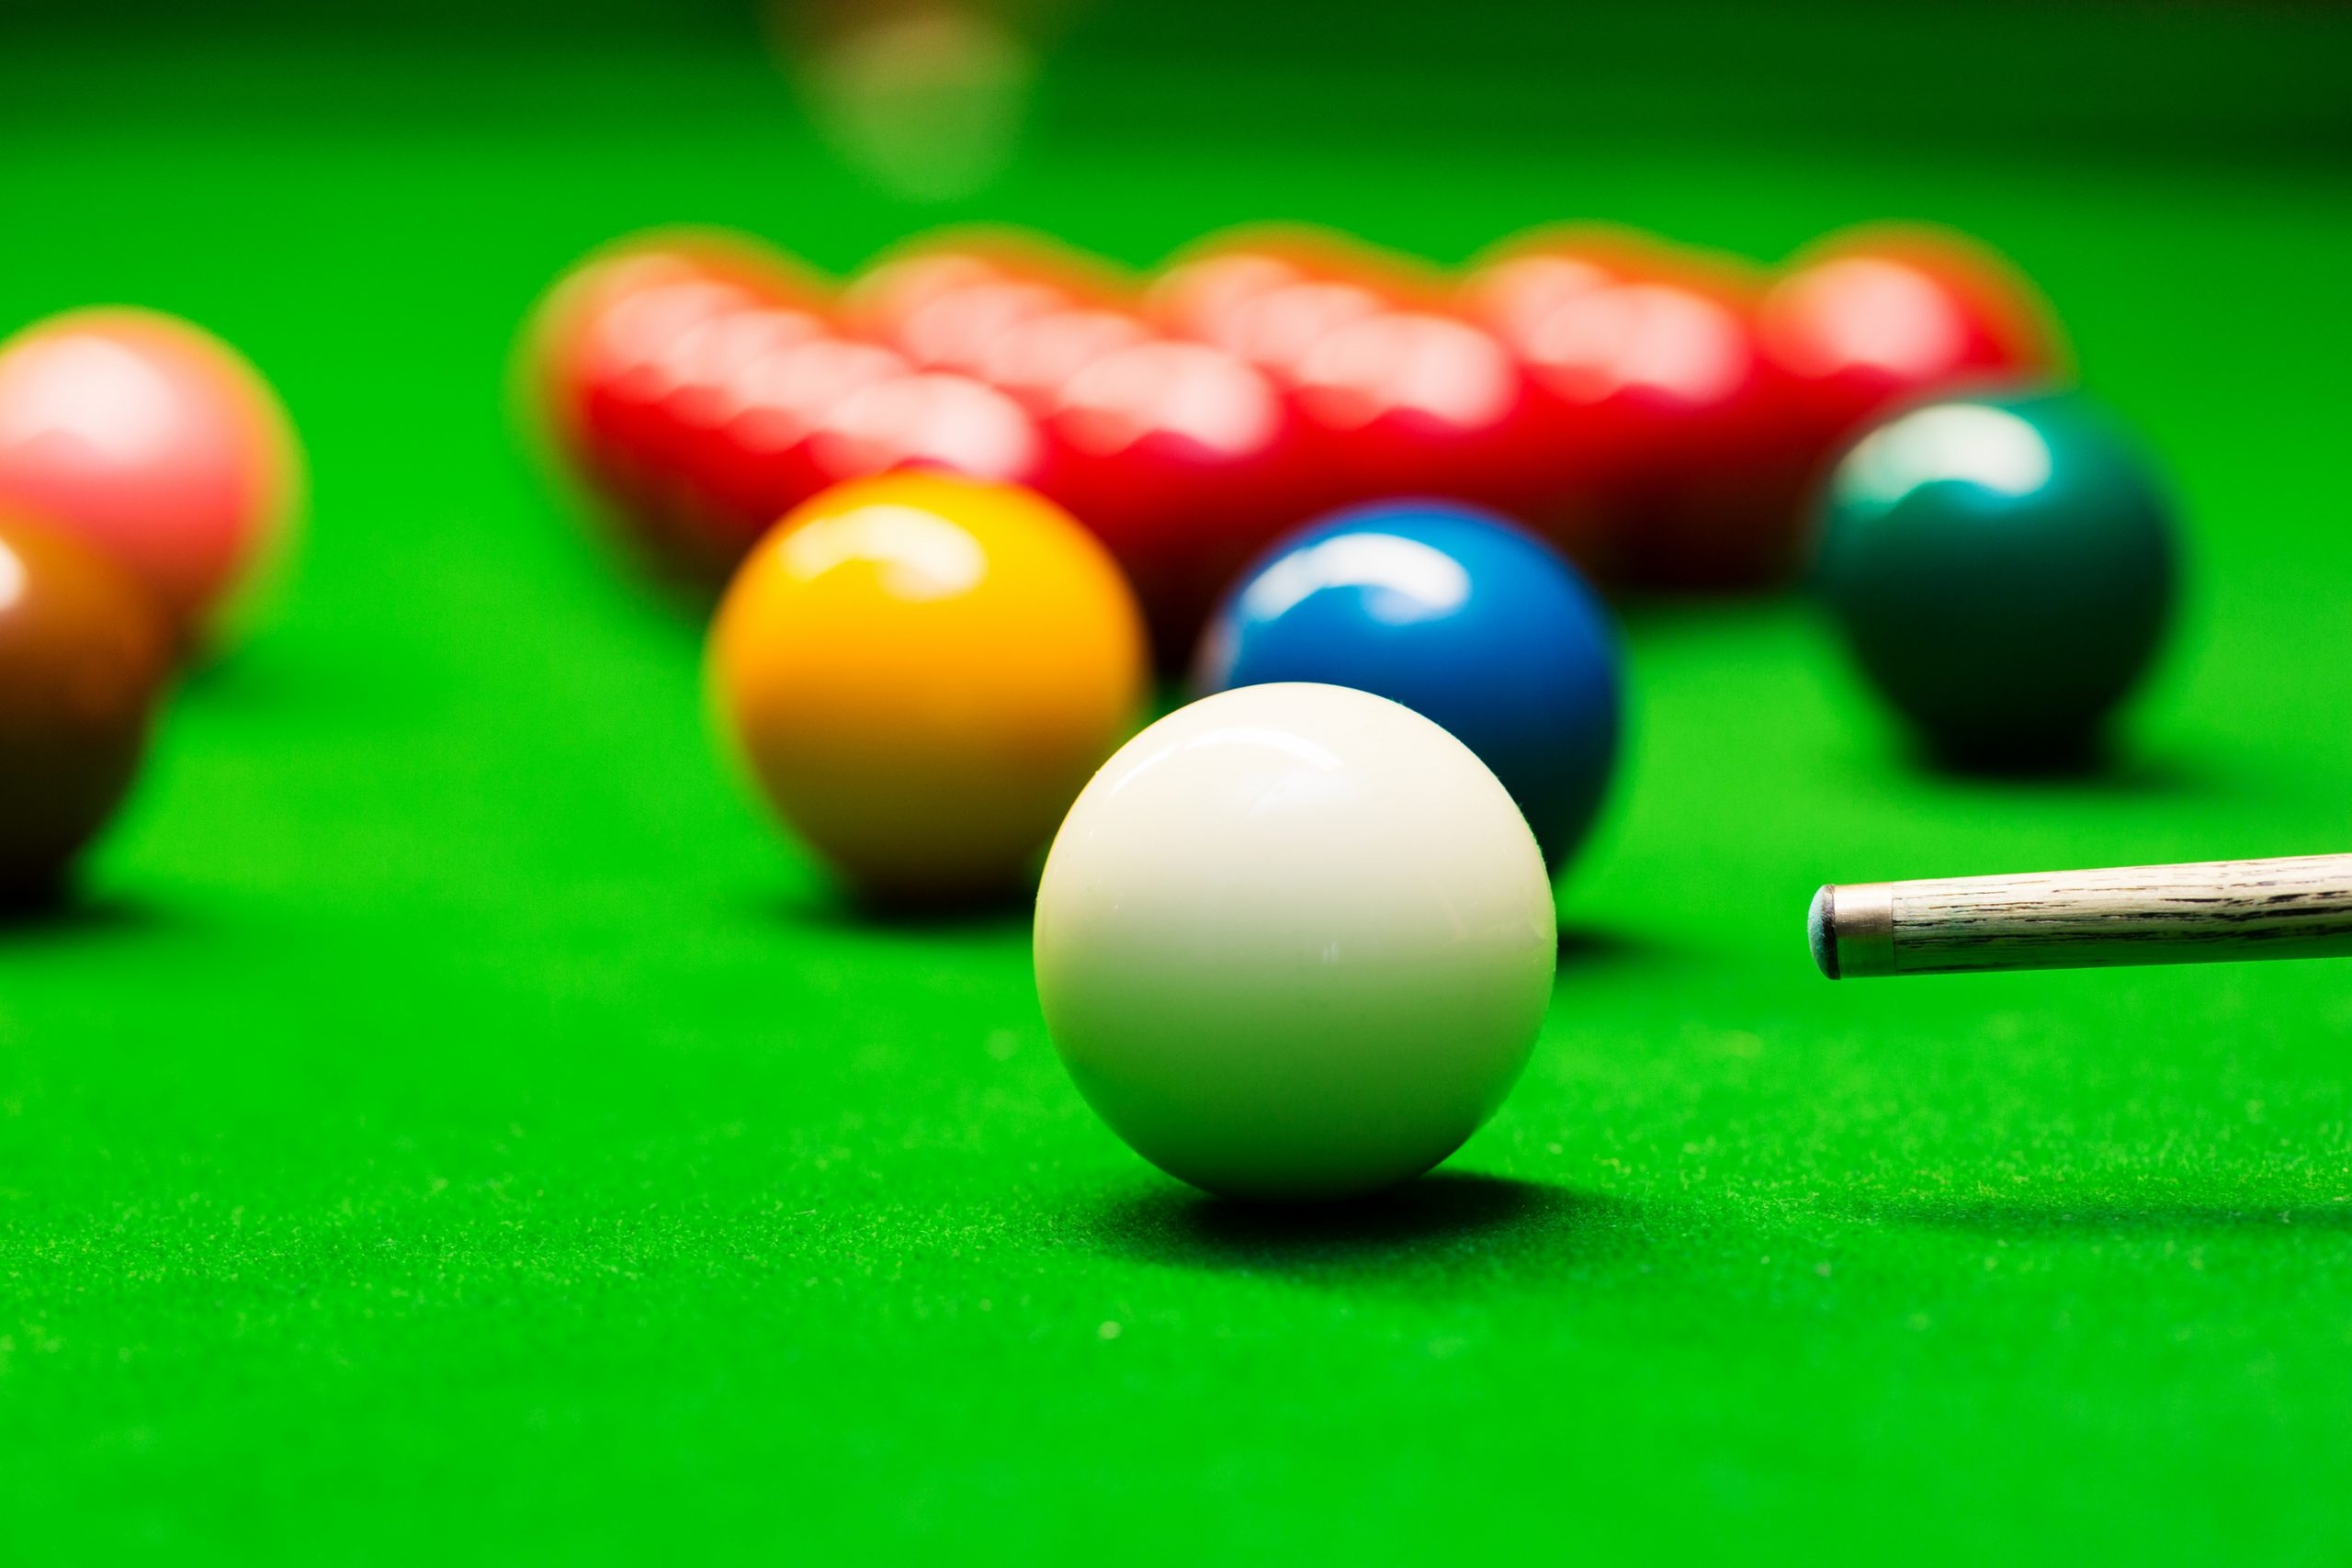 Snooker: Fifteen red object balls, six color balls and a cue ball - equipment for a classic British style of cue sport. 2560x1710 HD Wallpaper.